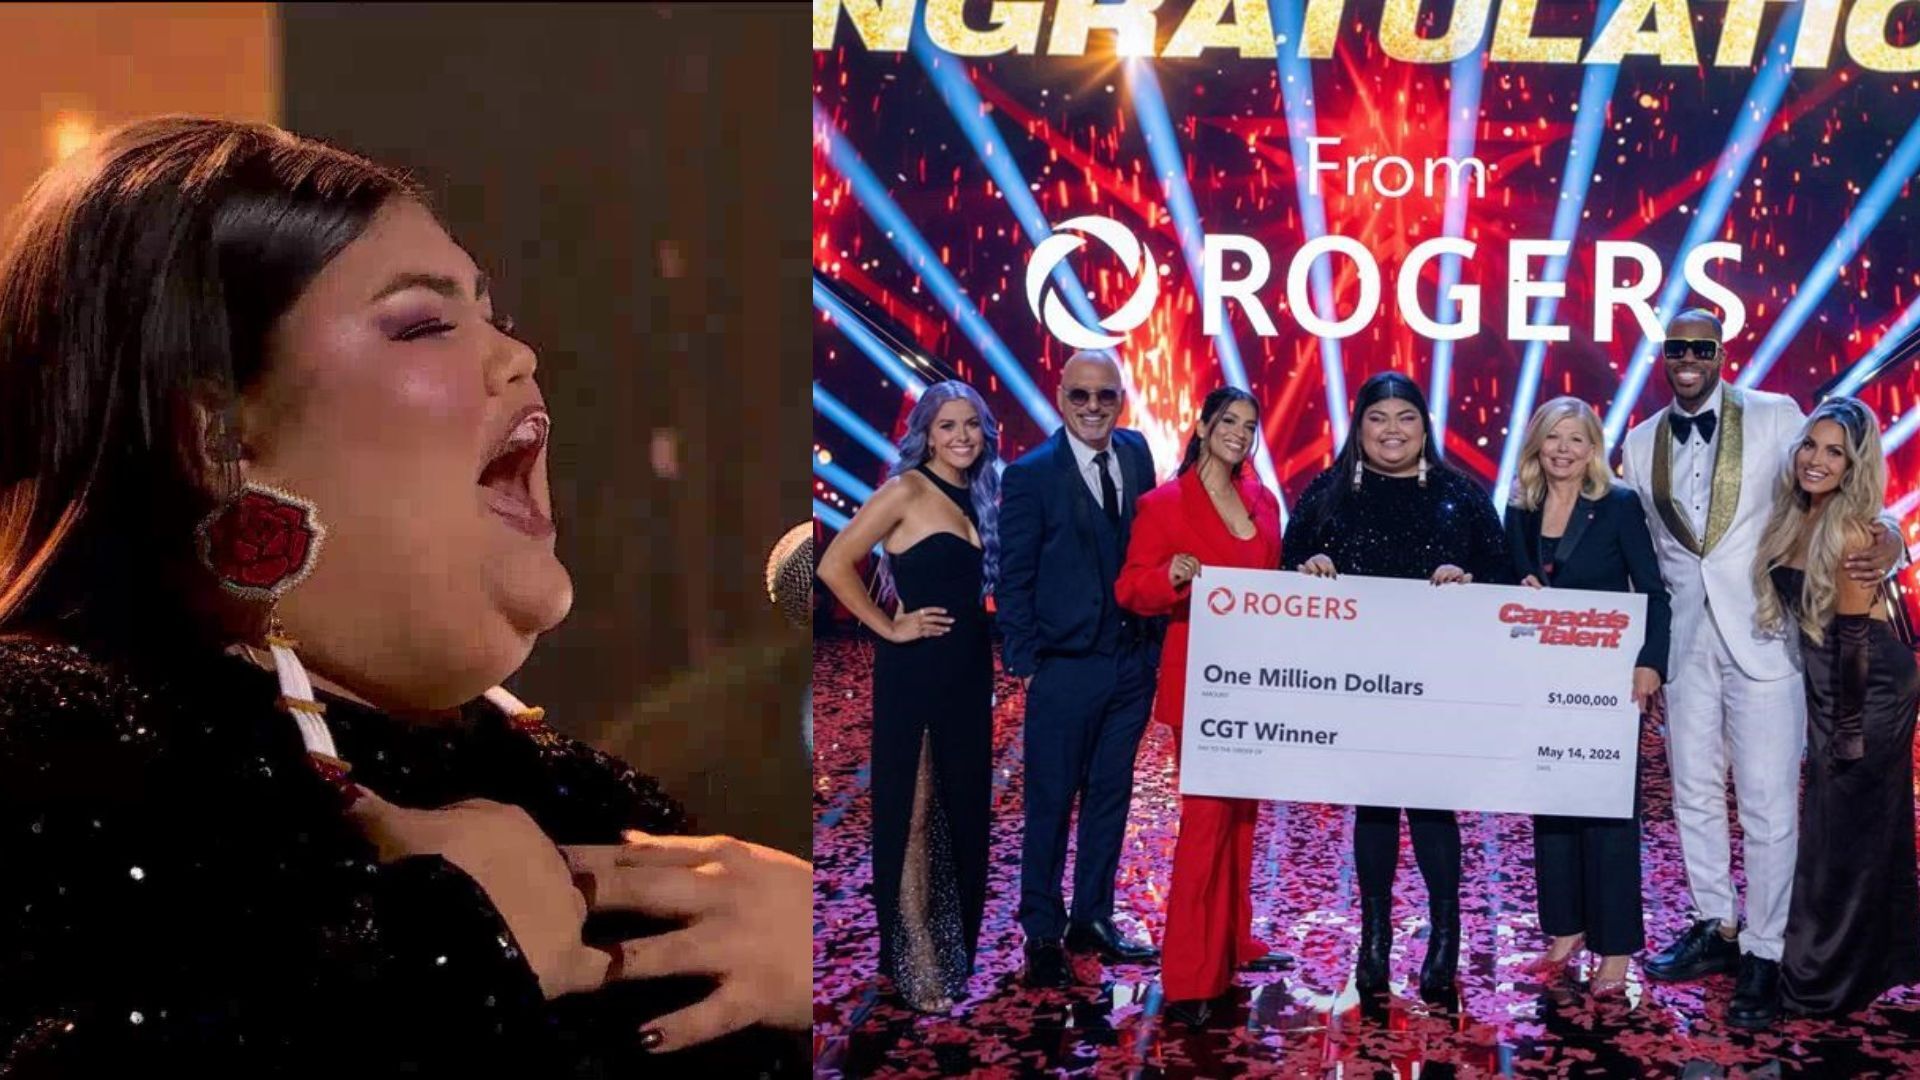 Saskatchewan singer Rebecca Strong reacts to winning $1M in jaw-dropping 'Canada’s Got Talent' finale